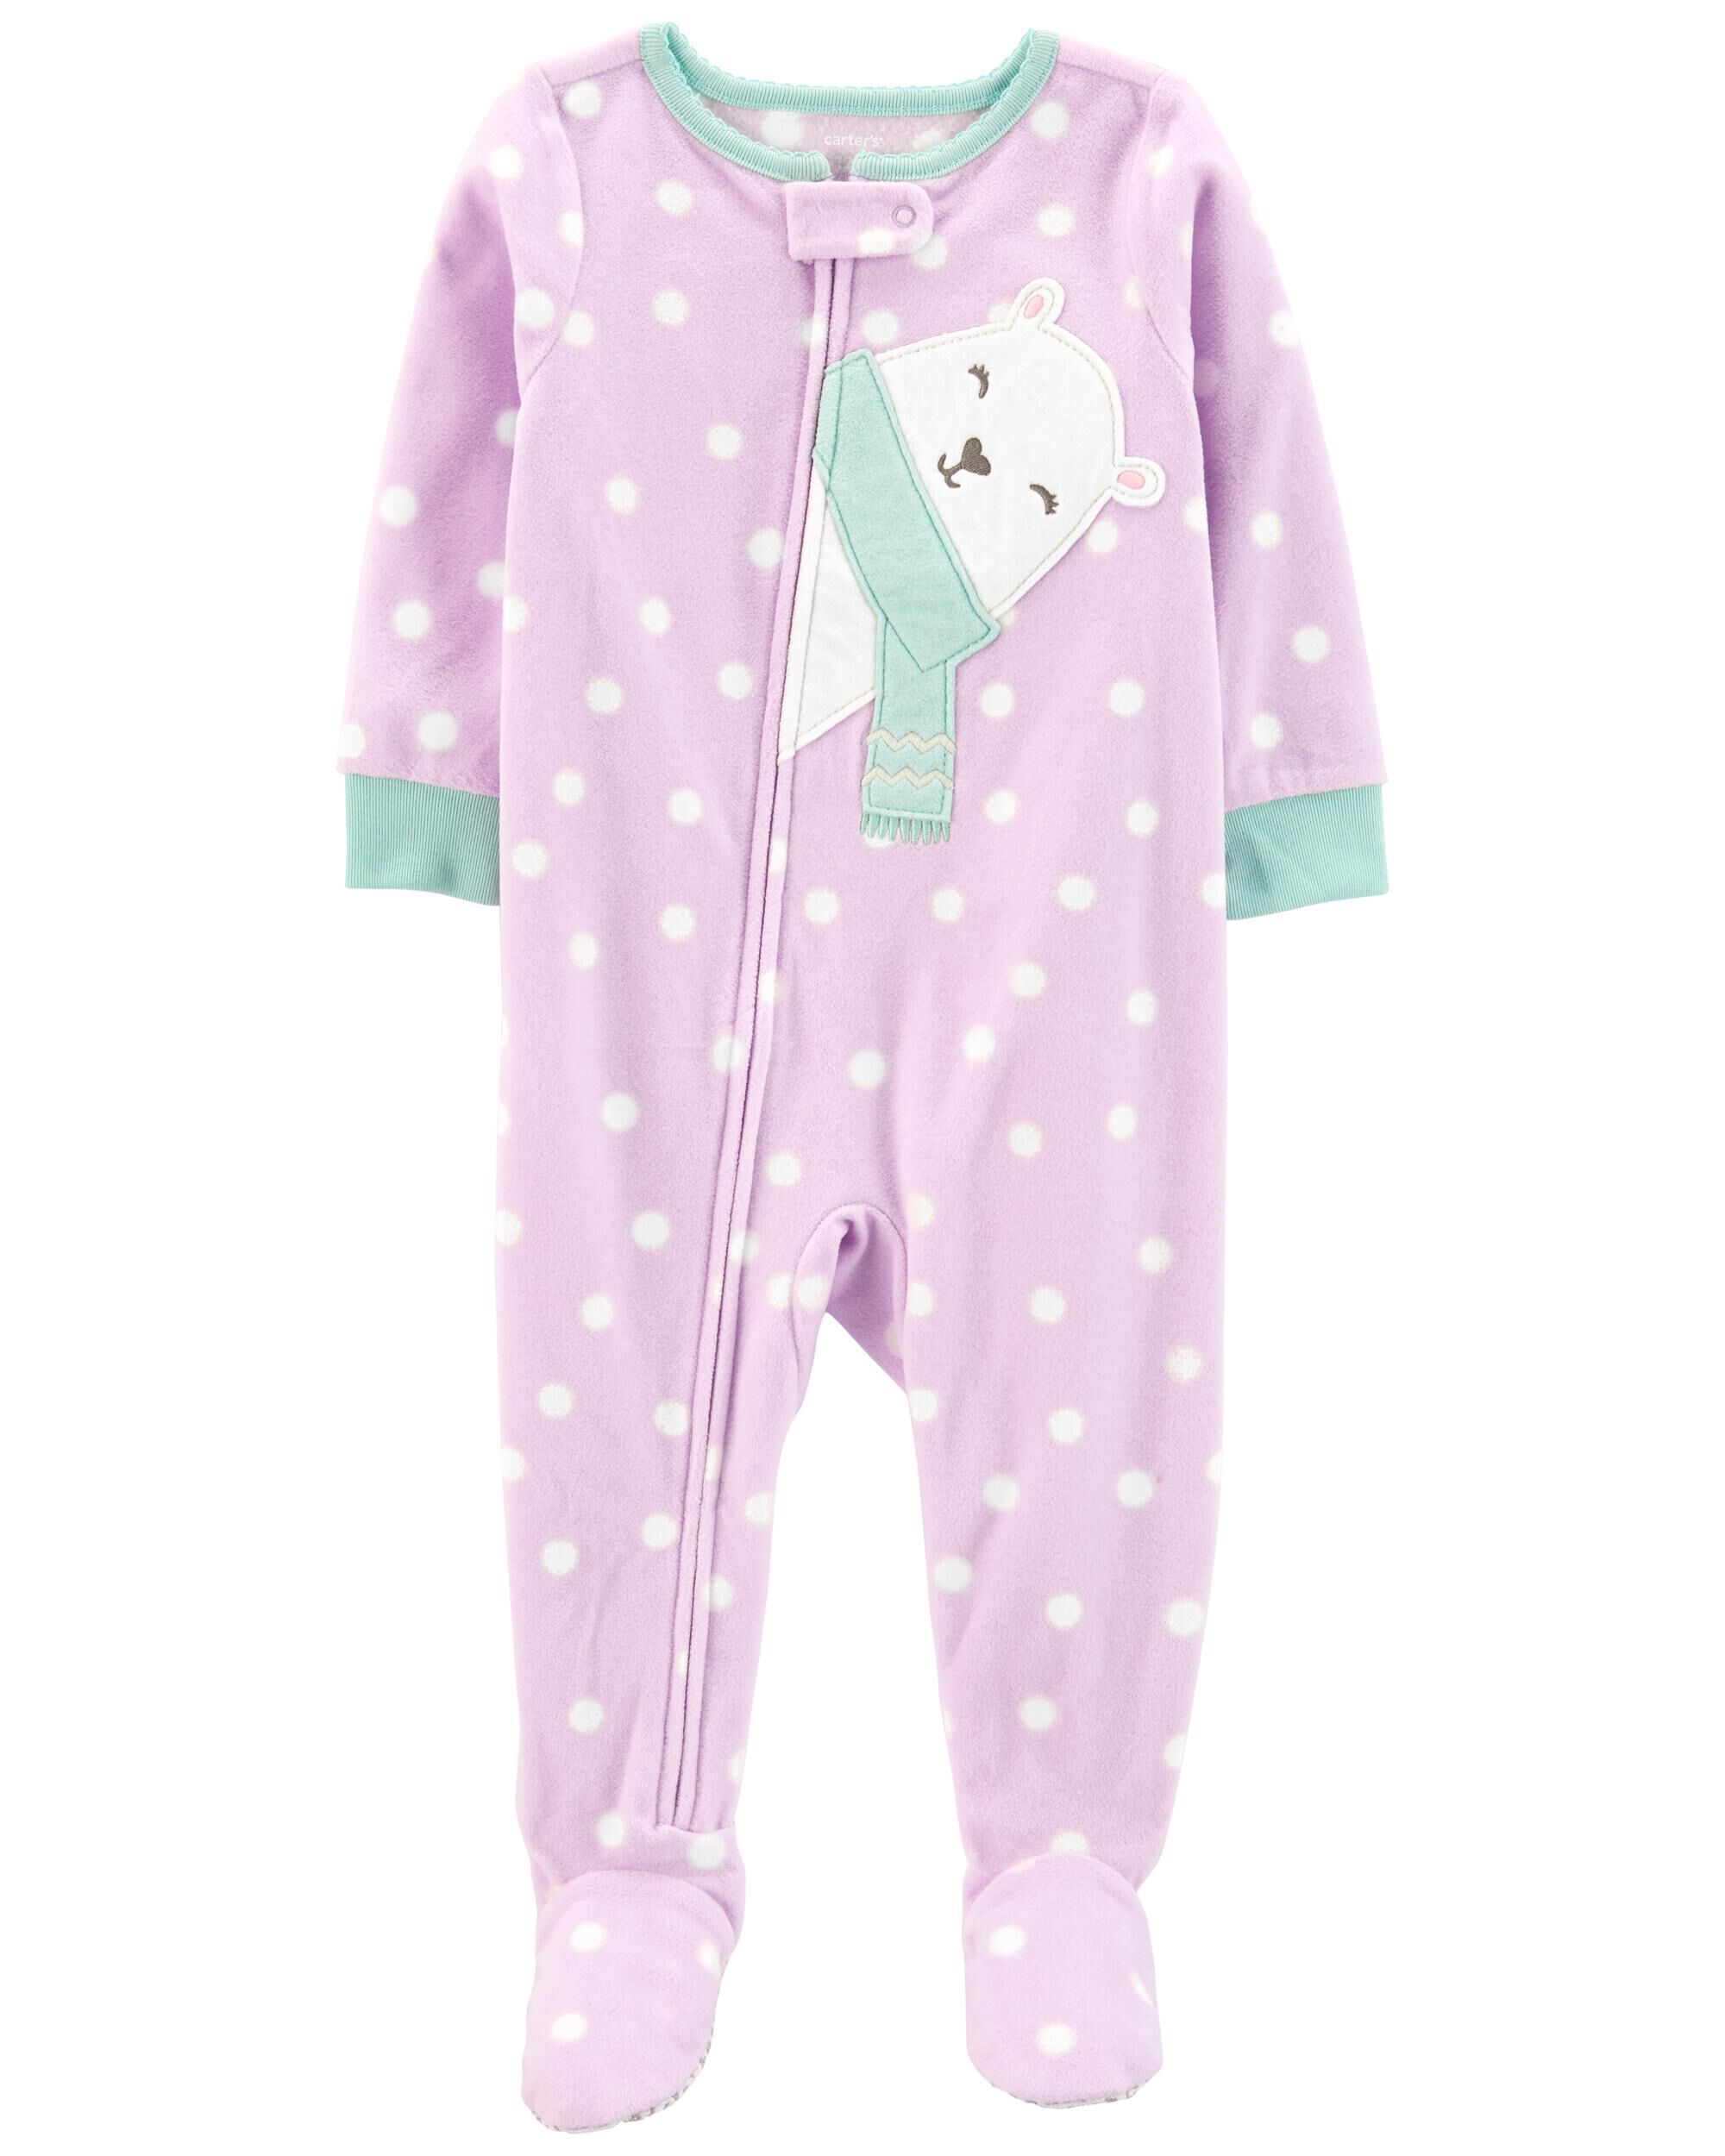 Carter's Infant Girl Footed Sleeper Play pyjamas assortis Styles & Tissus Neuf Avec Étiquettes 